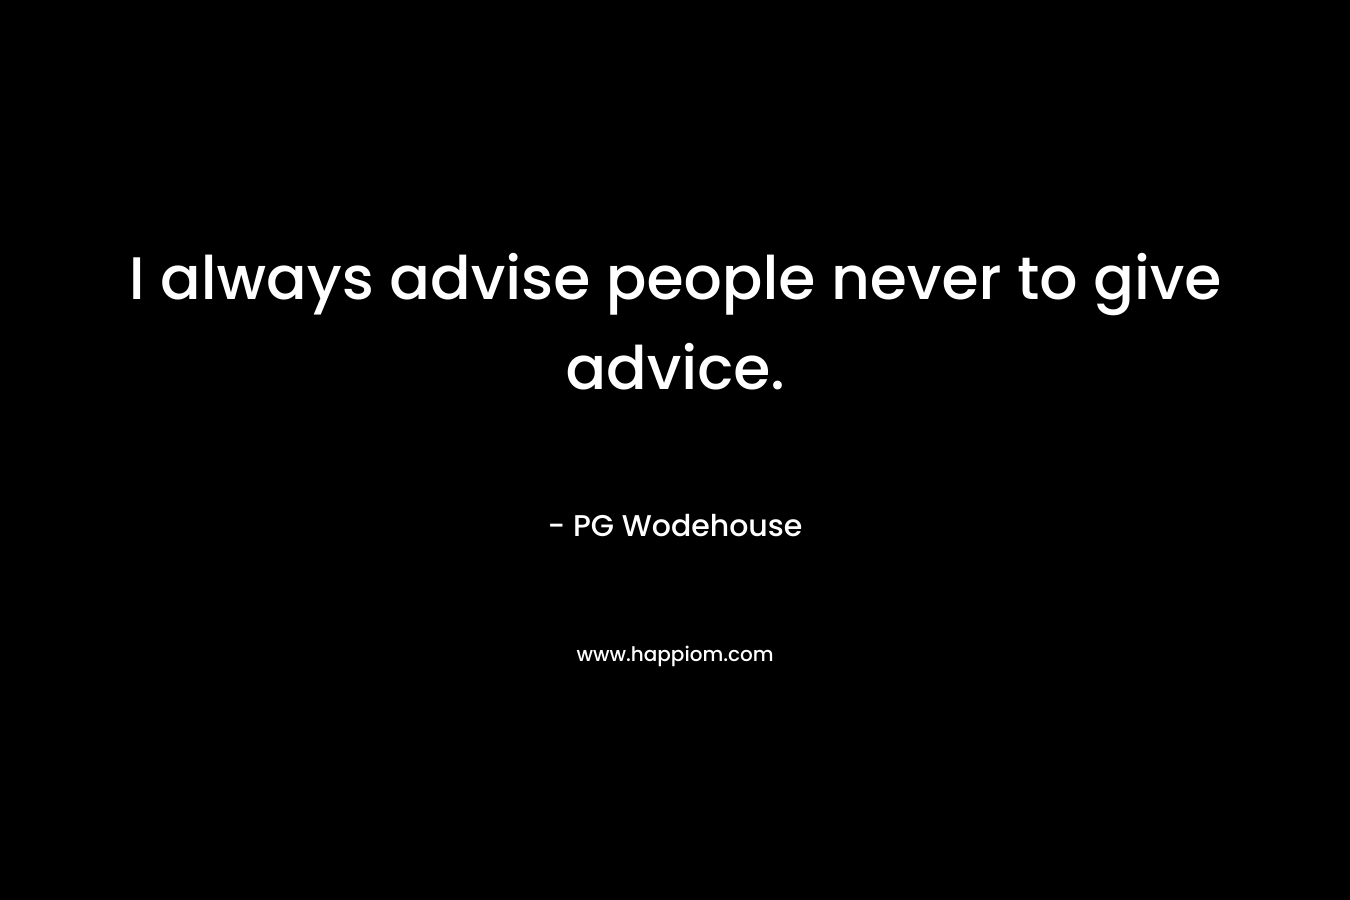 I always advise people never to give advice. – PG Wodehouse